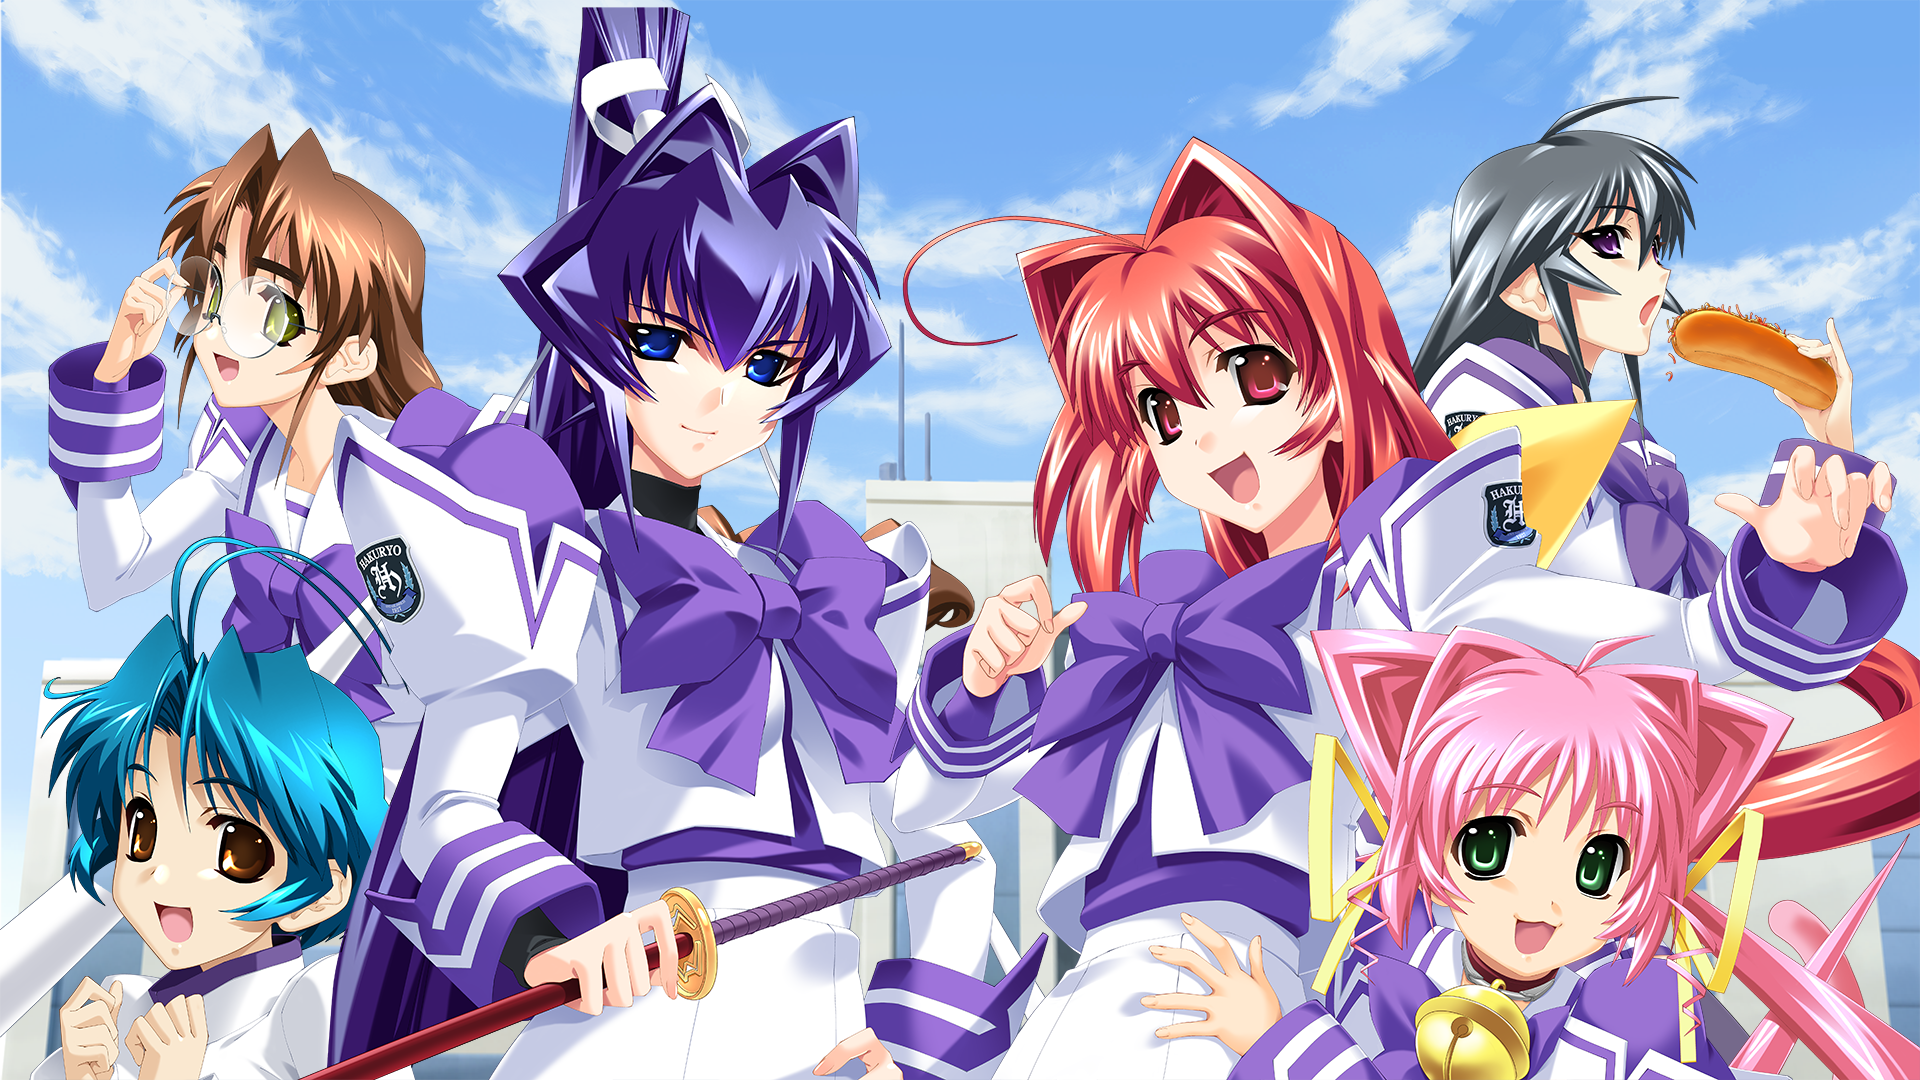 The Muv-Luv Smartphone Pre-Launch Campaign has begun as of 3/24/2022 8:00 PM JST!